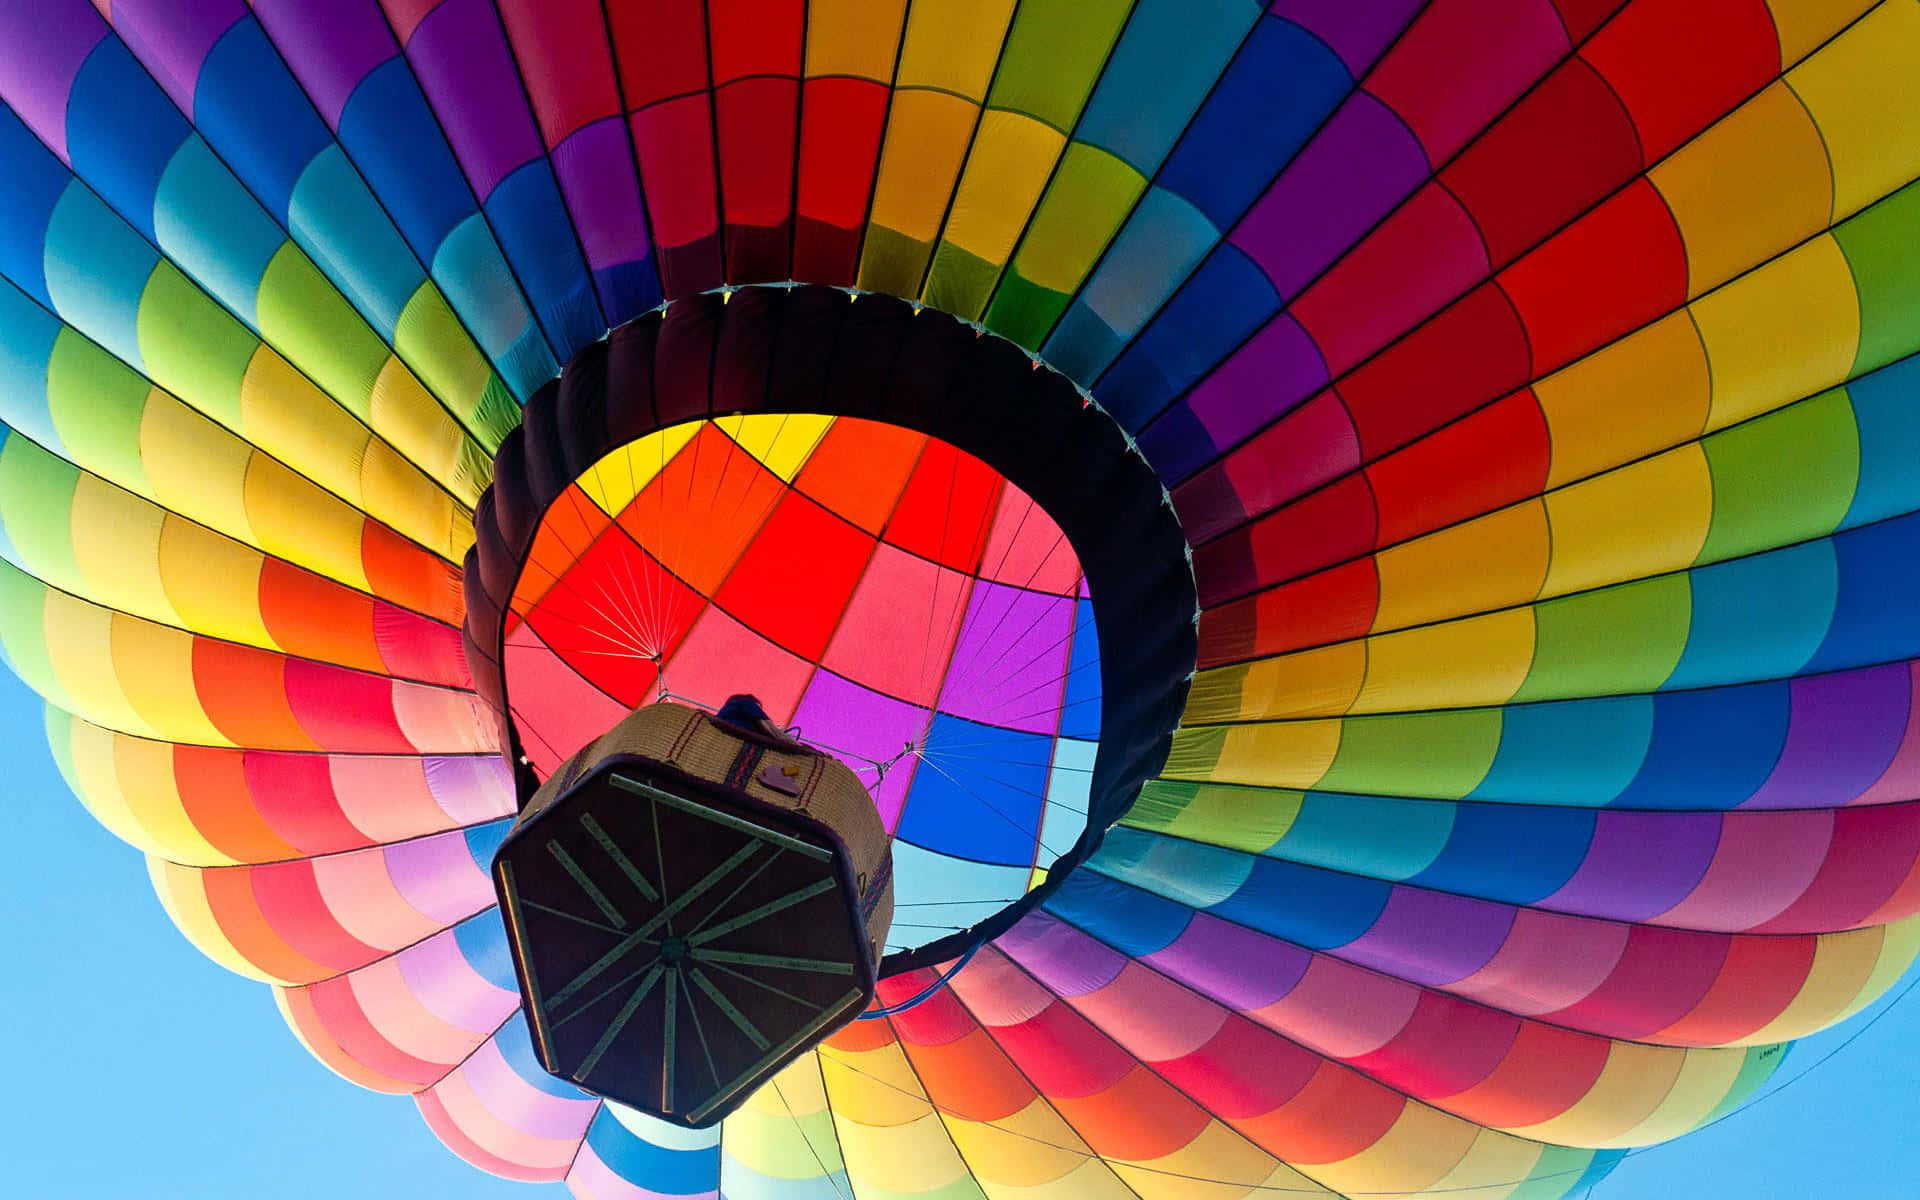 Celebrating with Colorful Hot Air Balloons